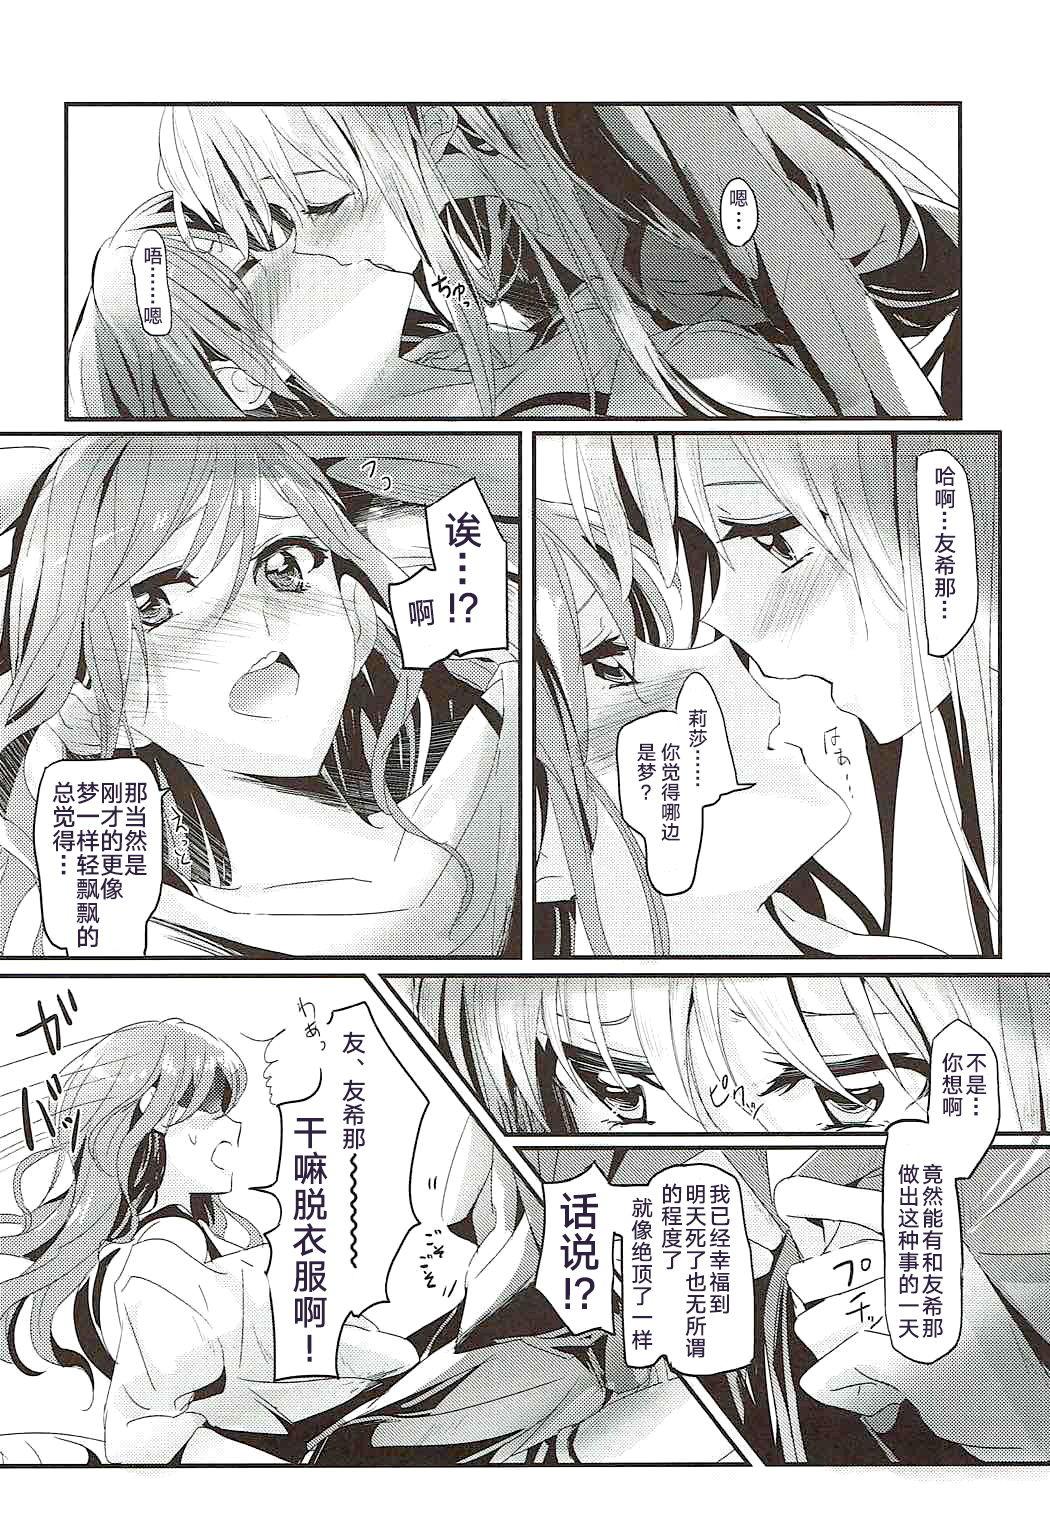 Anal Play Unstable feelings - Bang dream Gay Straight - Page 11